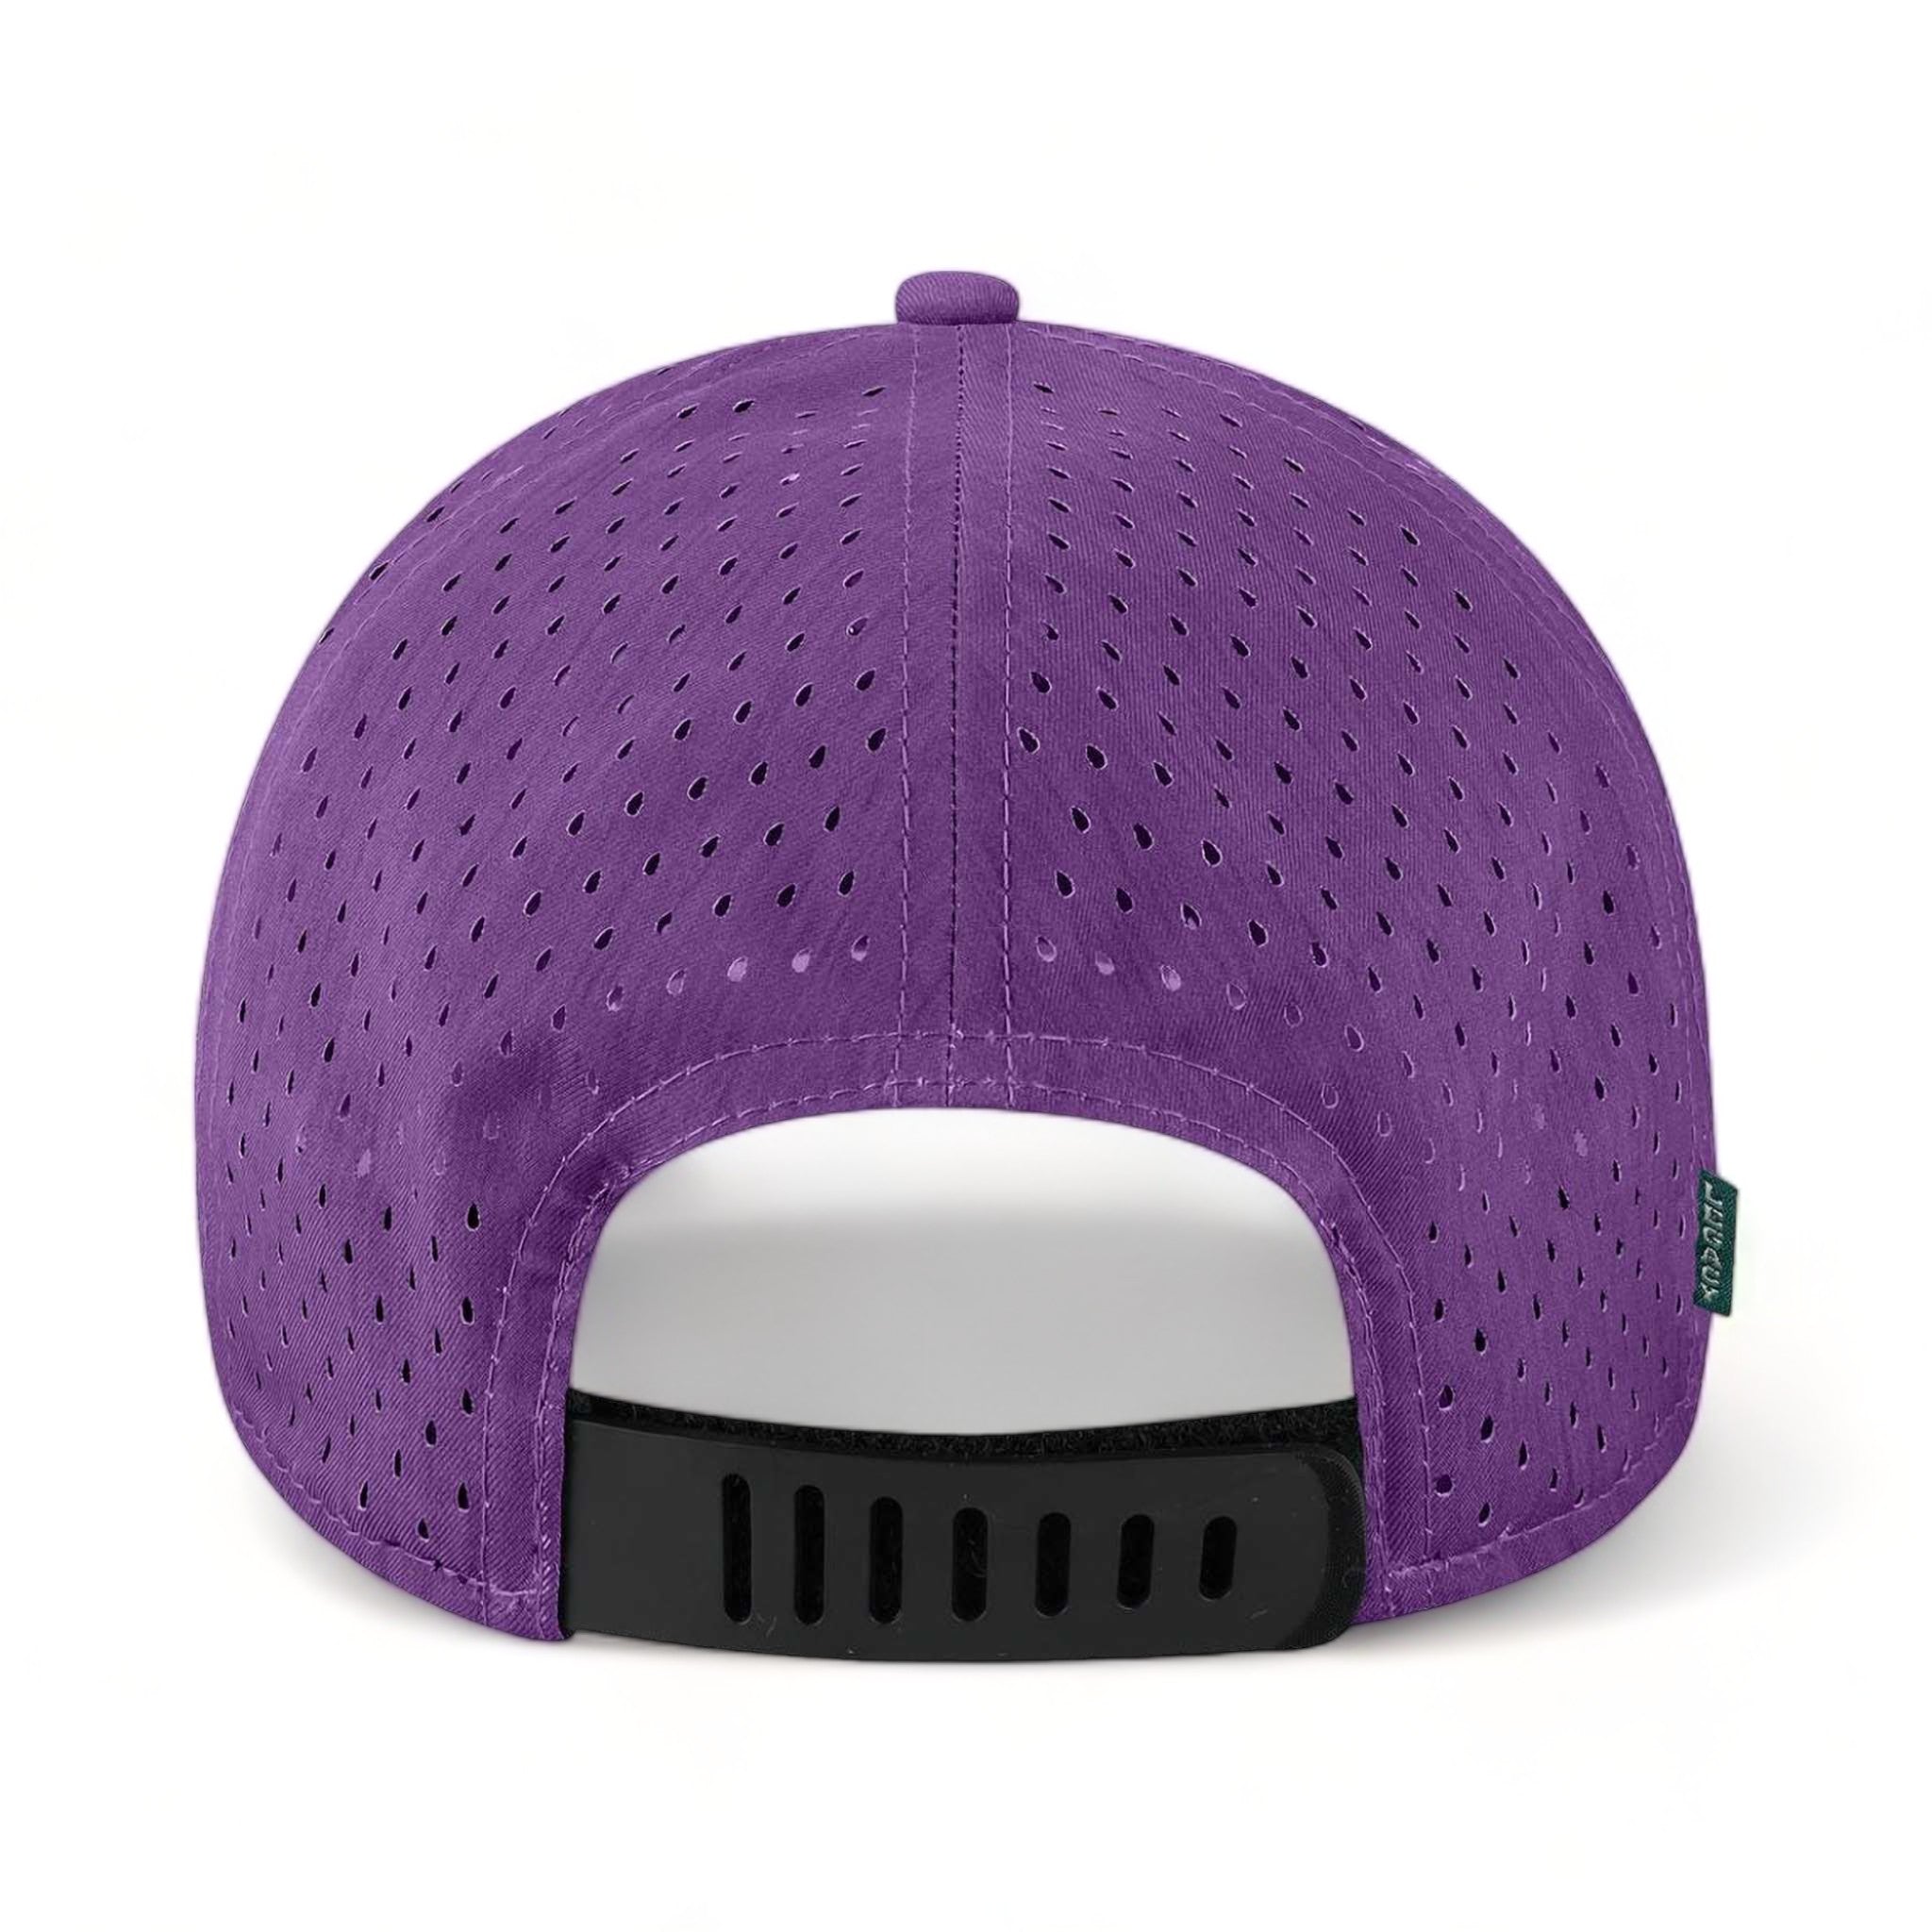 Back view of LEGACY REMPA custom hat in eco purple